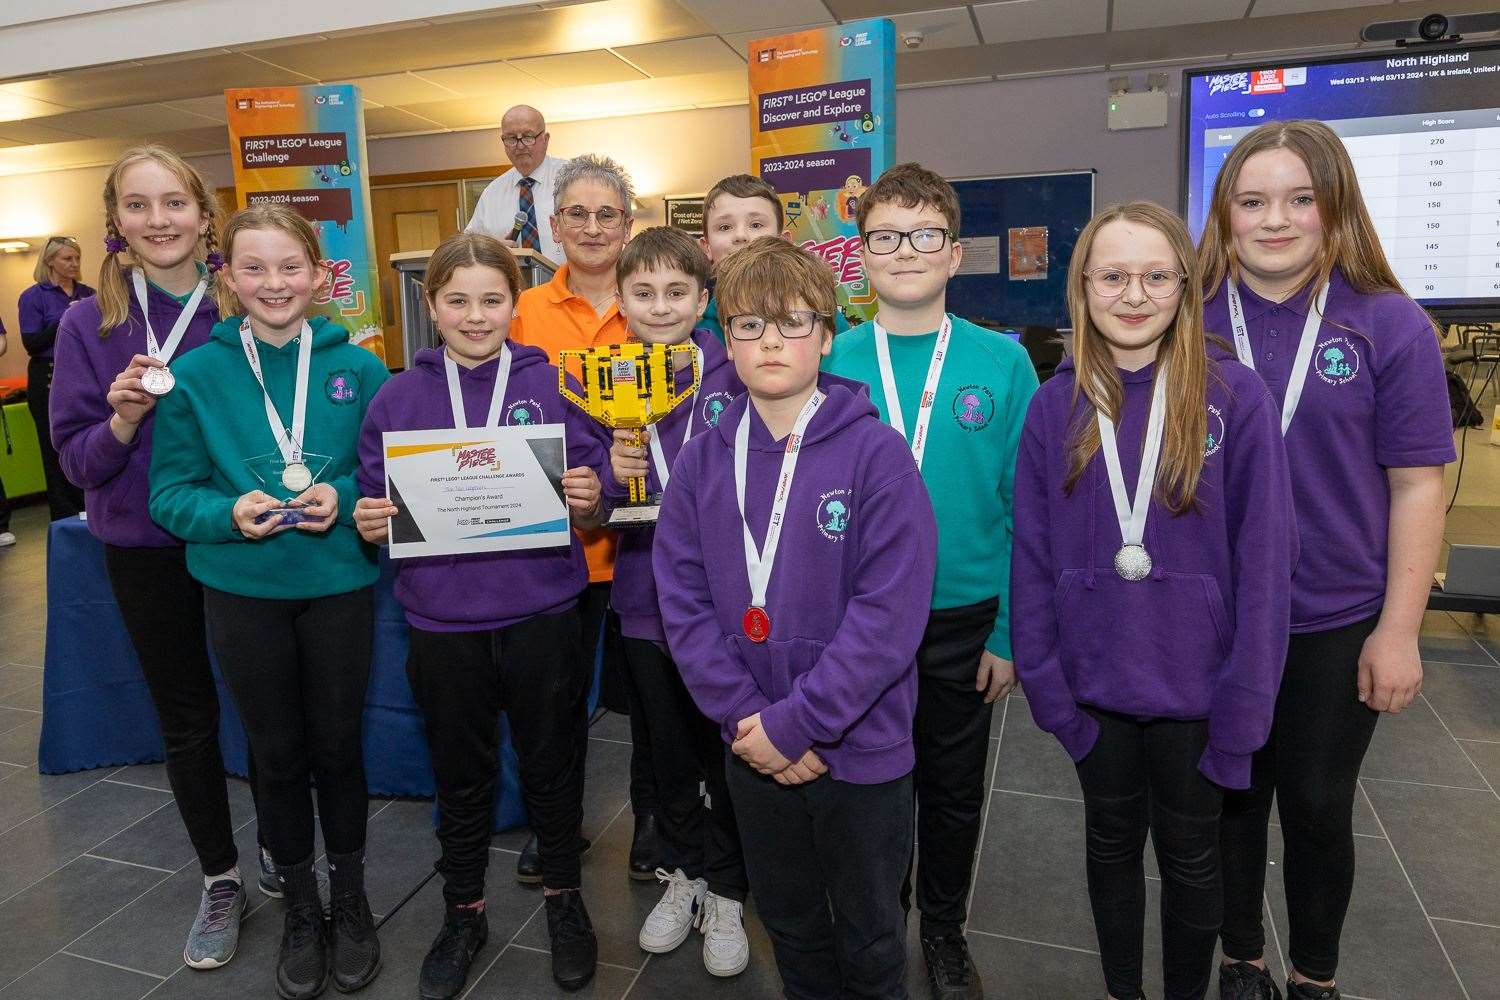 Members of the winning team, the Ten Lego-teers, with Trudy Morris, chief executive of Caithness Chamber of Commerce and DYW North Highland lead.